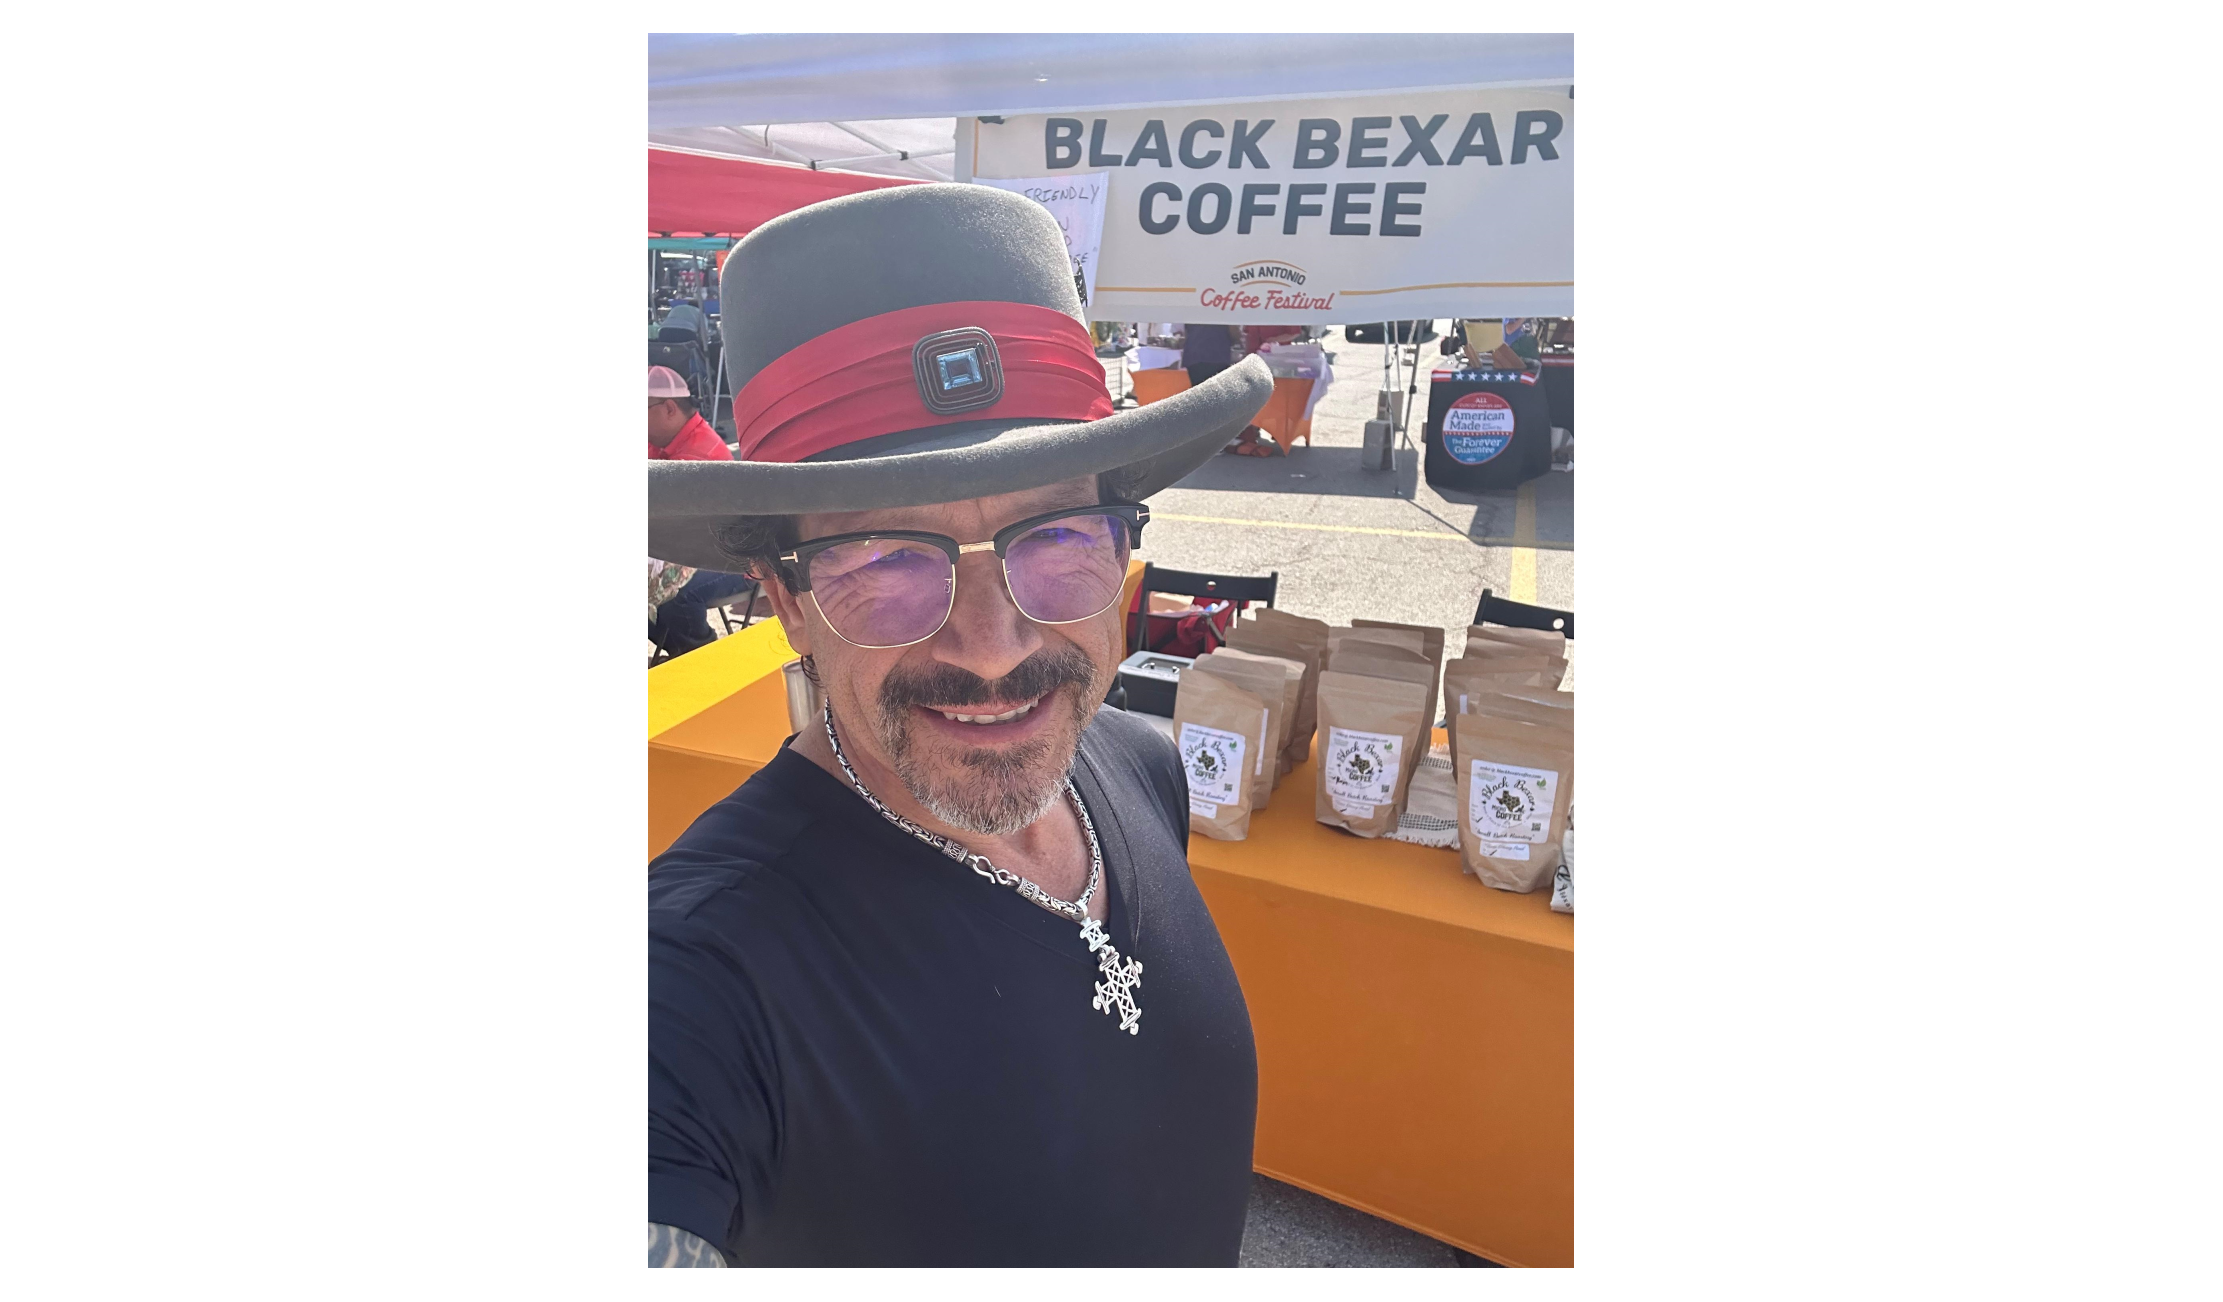 High-quality, Ethically Sourced - Black Bexar Coffee